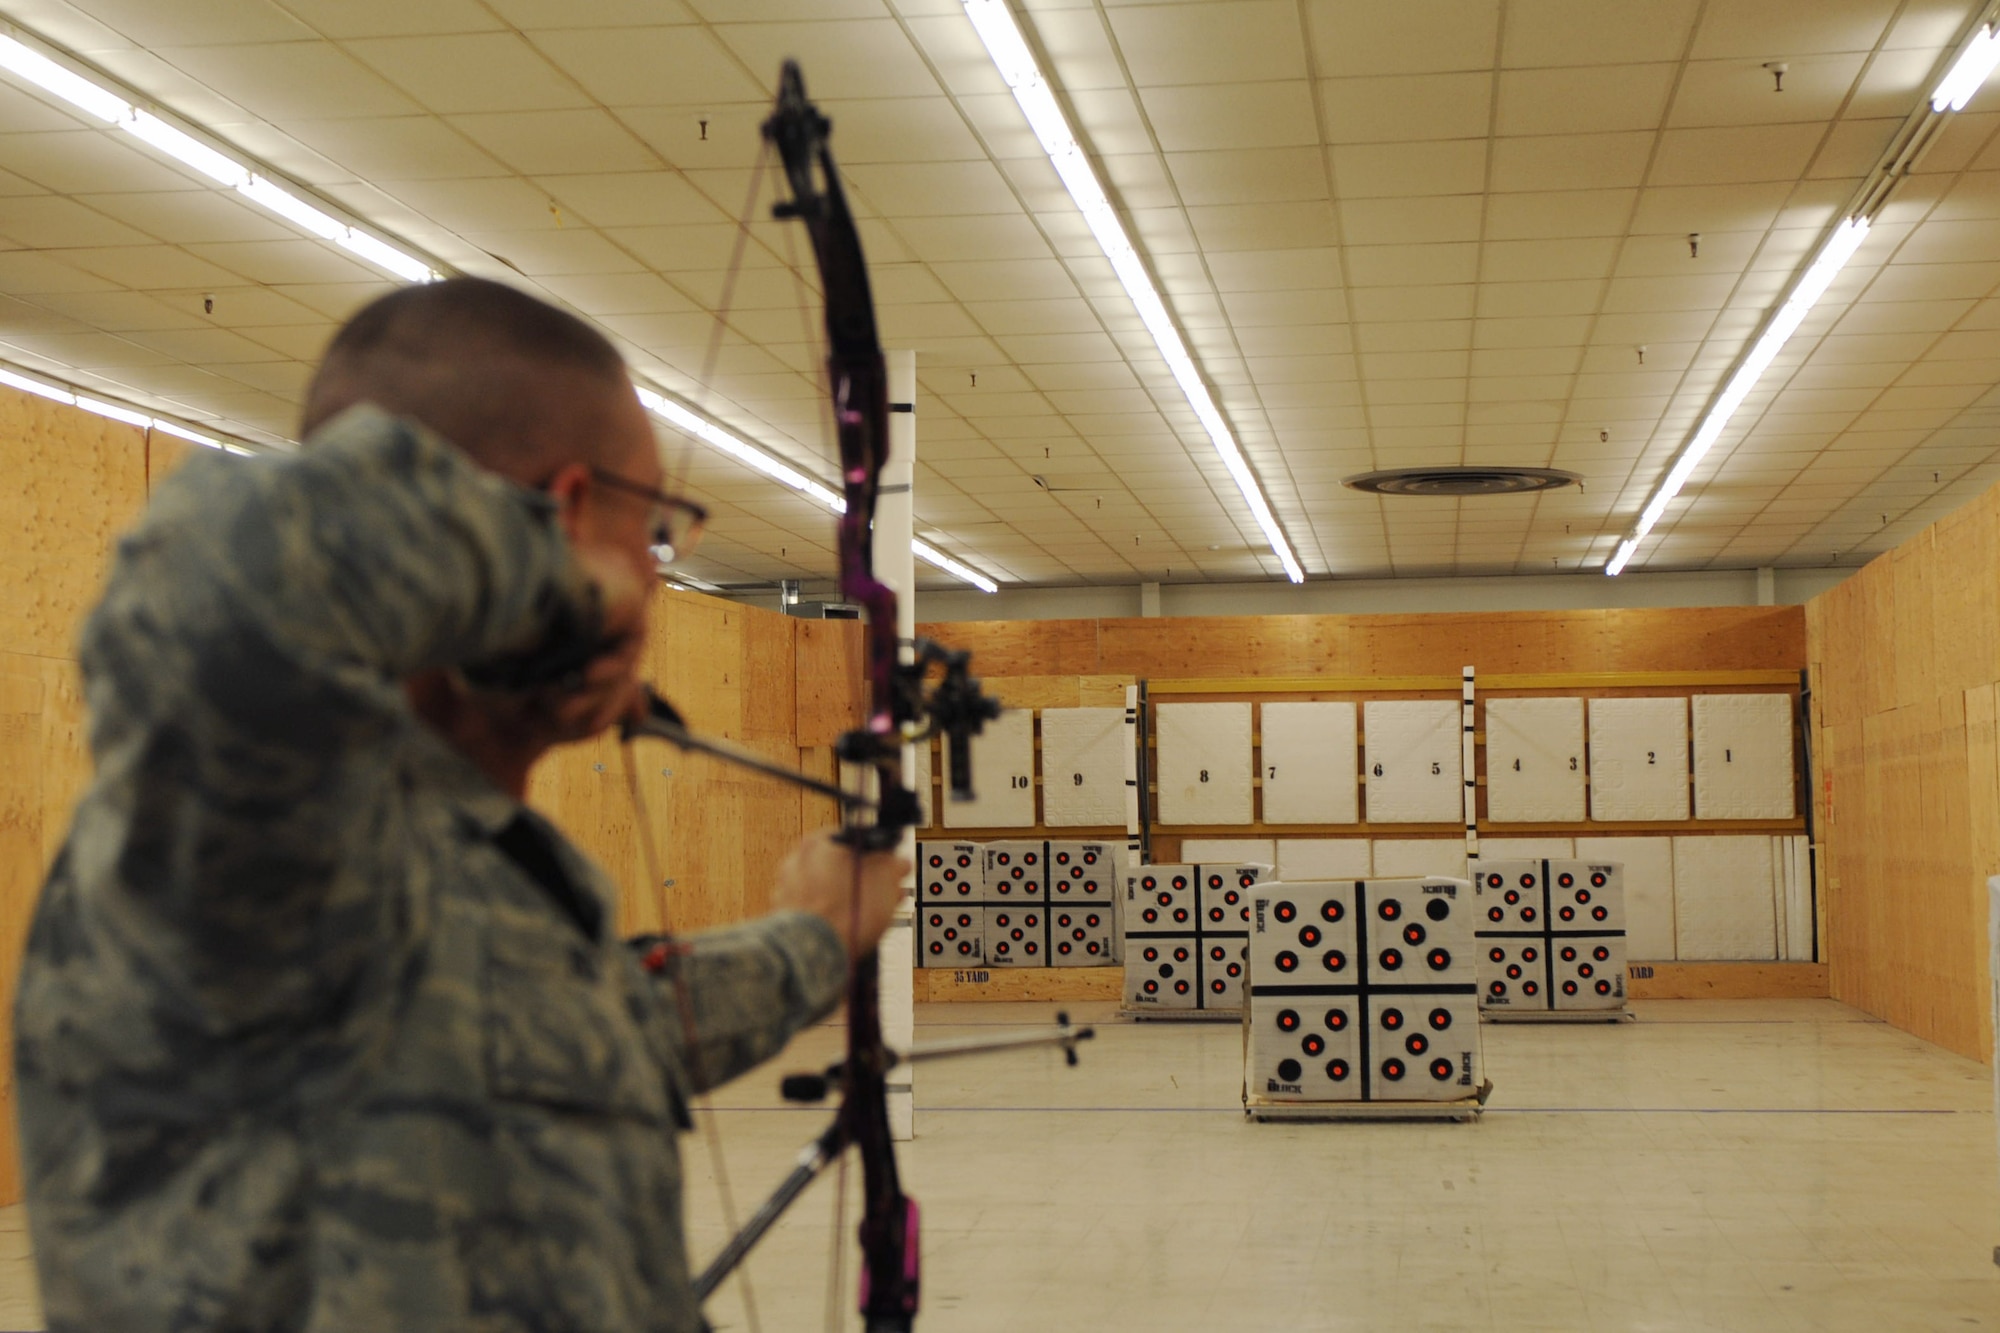 Master Sgt. Jack Rick, 28th Maintenance Group wing avionics manager, draws his bow in the Doolittle Indoor Archery Range at Ellsworth Air Force Base, S.D., Jan. 15, 2014. Members of the Ellsworth Rod and Gun Club receive free 24-hour access to the range, which offers four stationary 35-yard targets, eight lanes of movable targets, and two stationary 10-yard youth targets. (U.S. Air Force photo by Airman 1st Class Anania Tekurio/Released) 